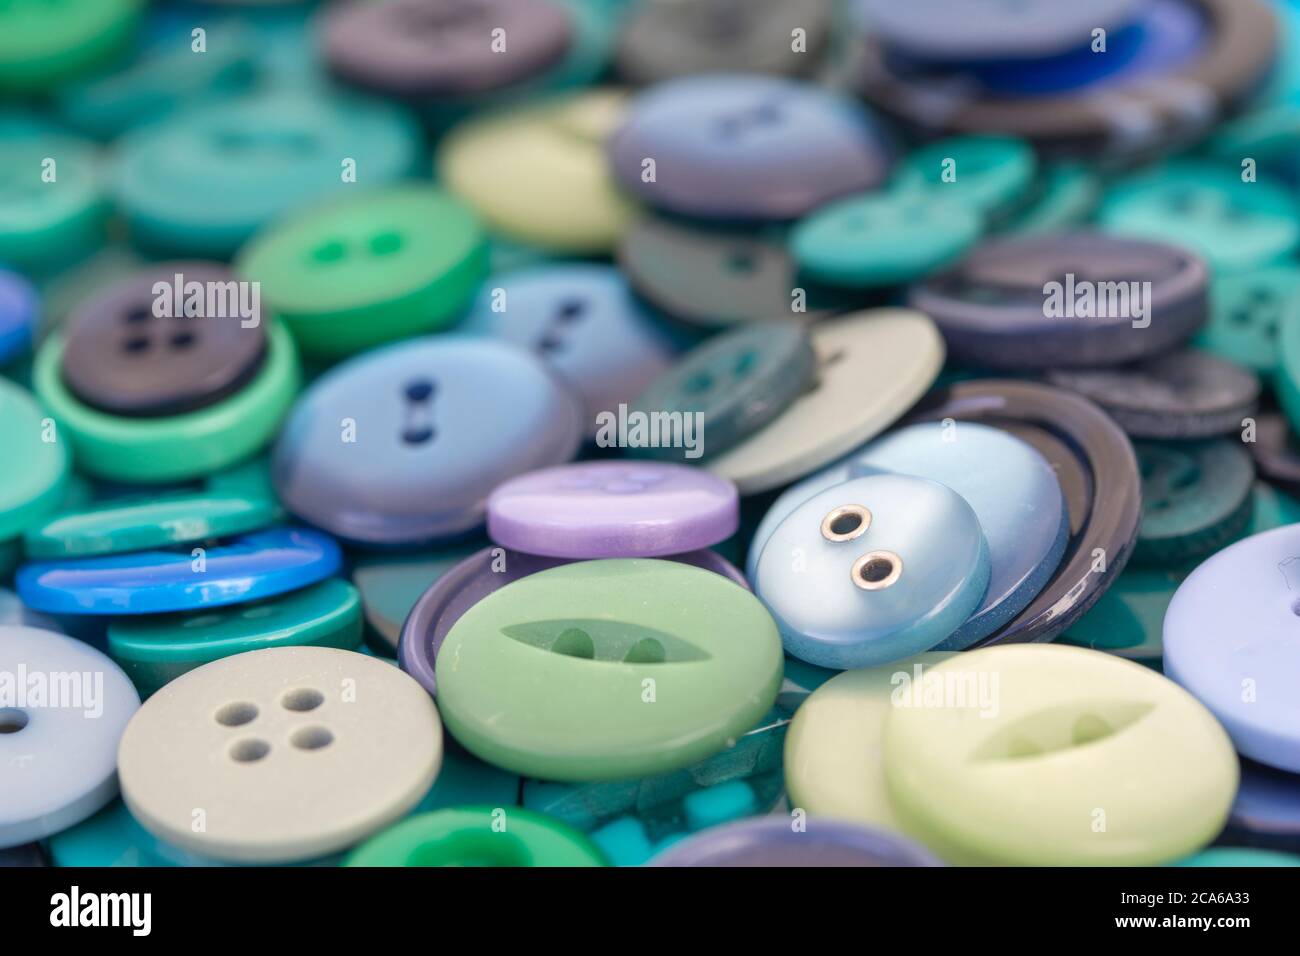 Closeup image of green, lavender and blue buttons Stock Photo